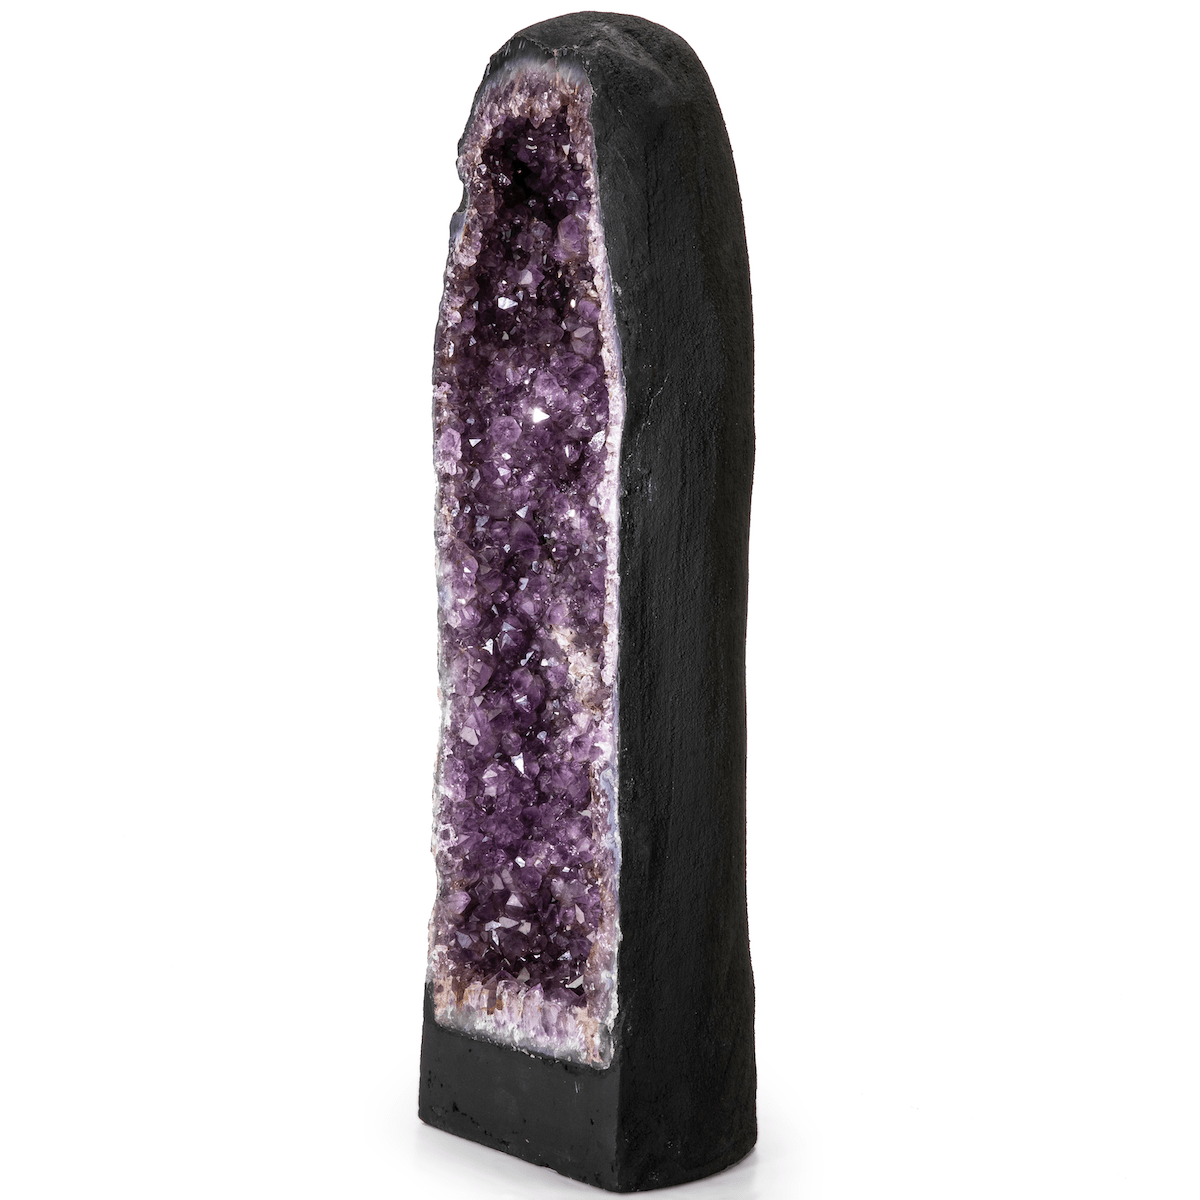 Kalifano Amethyst Natural Brazilian Amethyst Crystal Geode Cathedral - 25 in / 42 lbs BAG5800.001